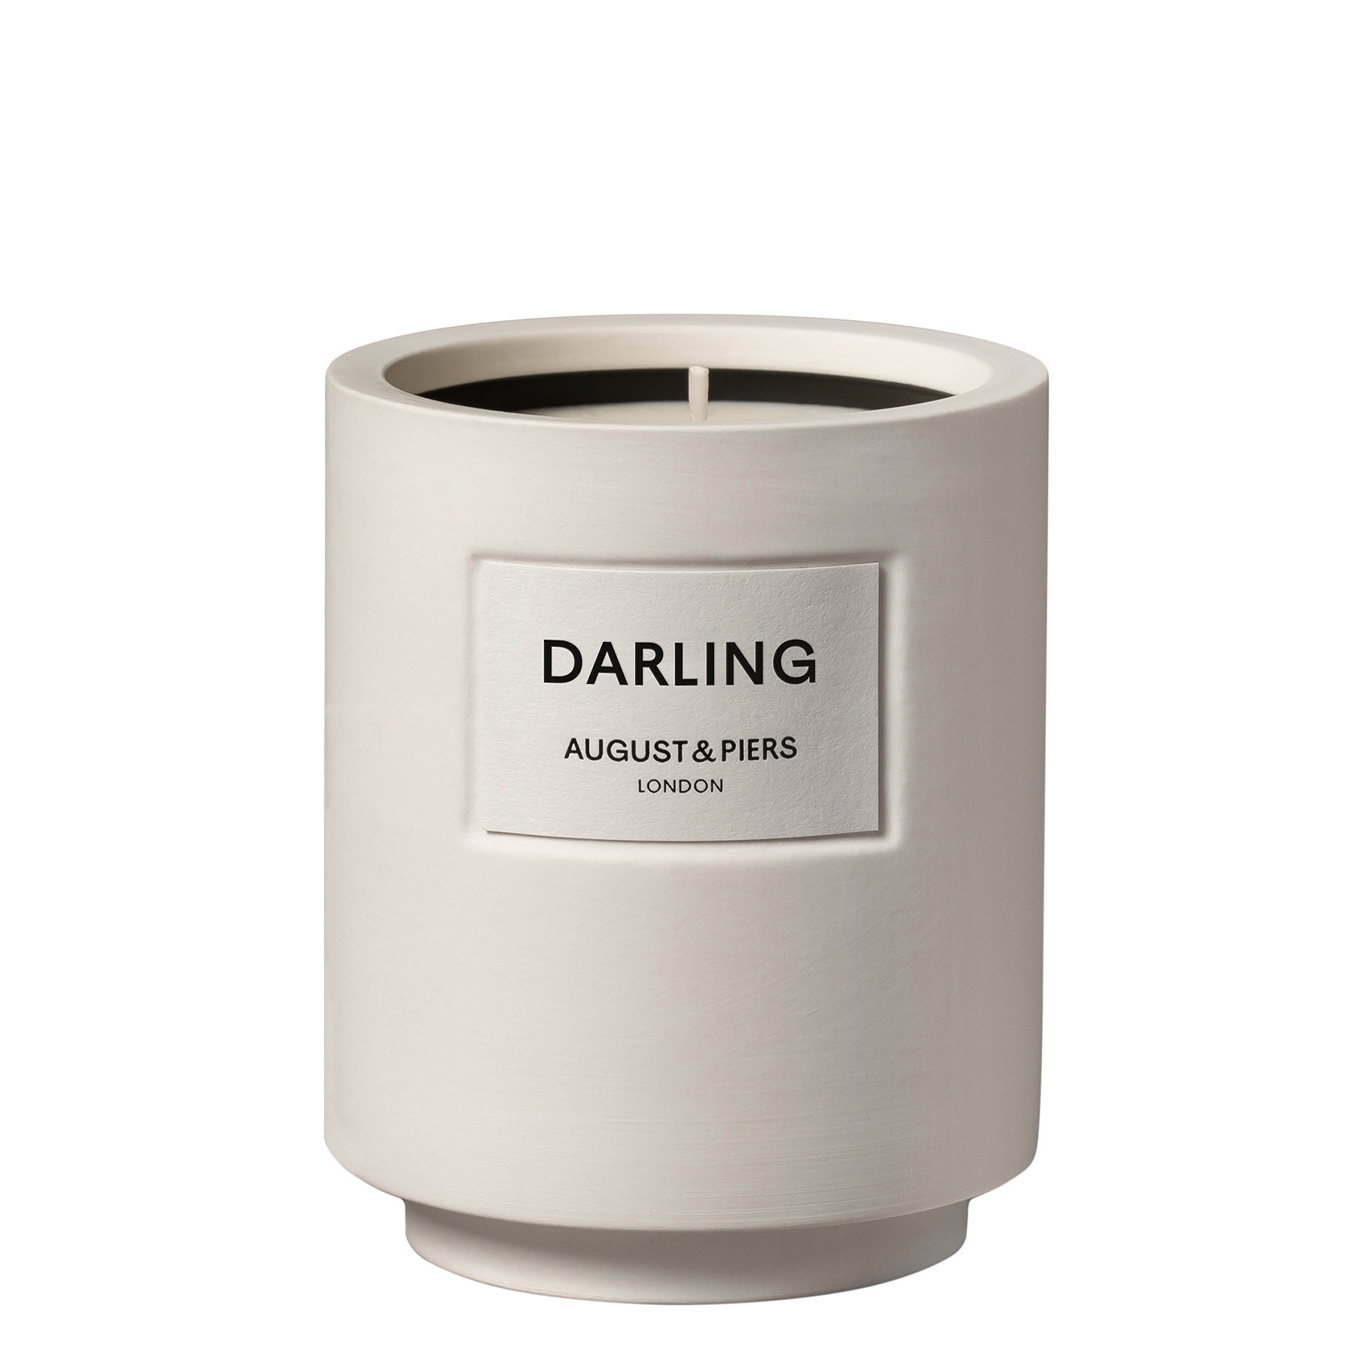 August & Piers Darling Scented Candle 340g